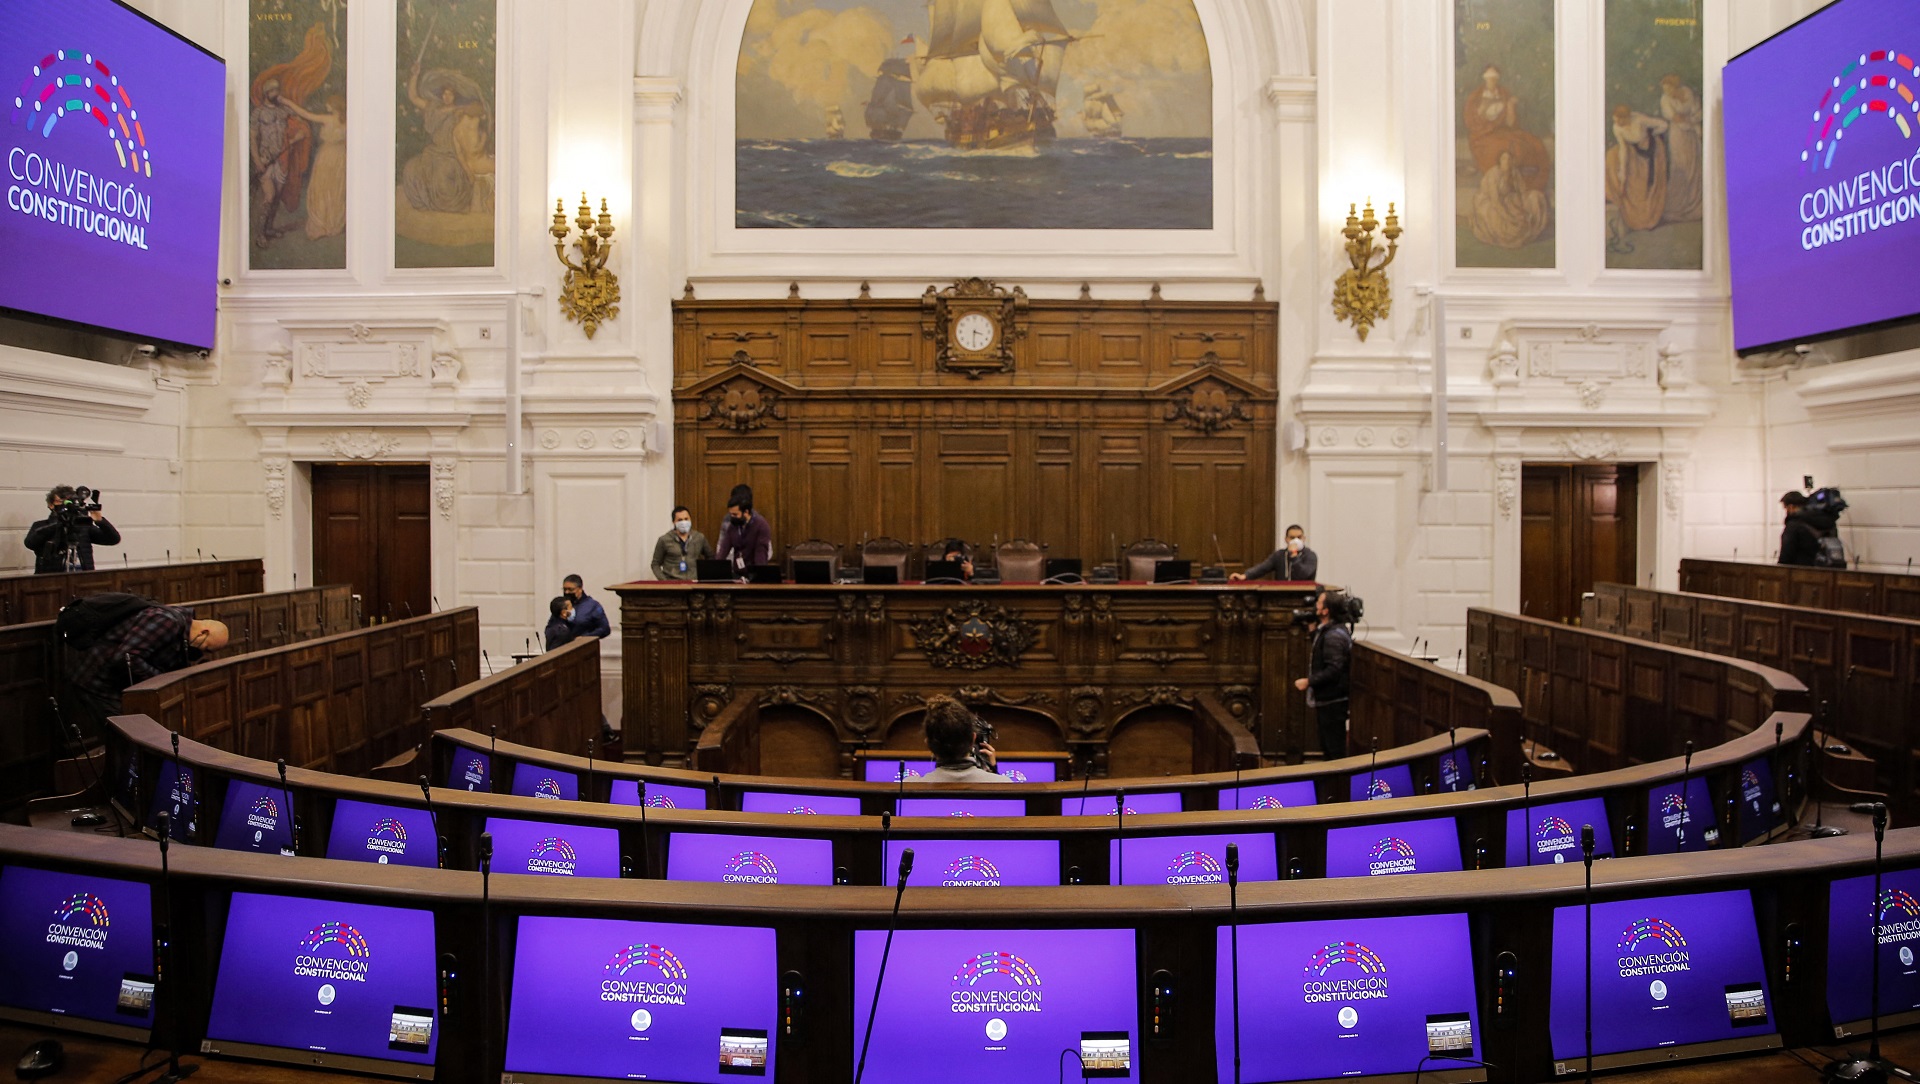 View of the interior of the National Congress headquarters in Santiago which will house 155 constituents who will draft the new Constitution, in Santiago 30 June 2021. - The assembly will be installed on July 4. (Photo by JAVIER TORRES / AFP)